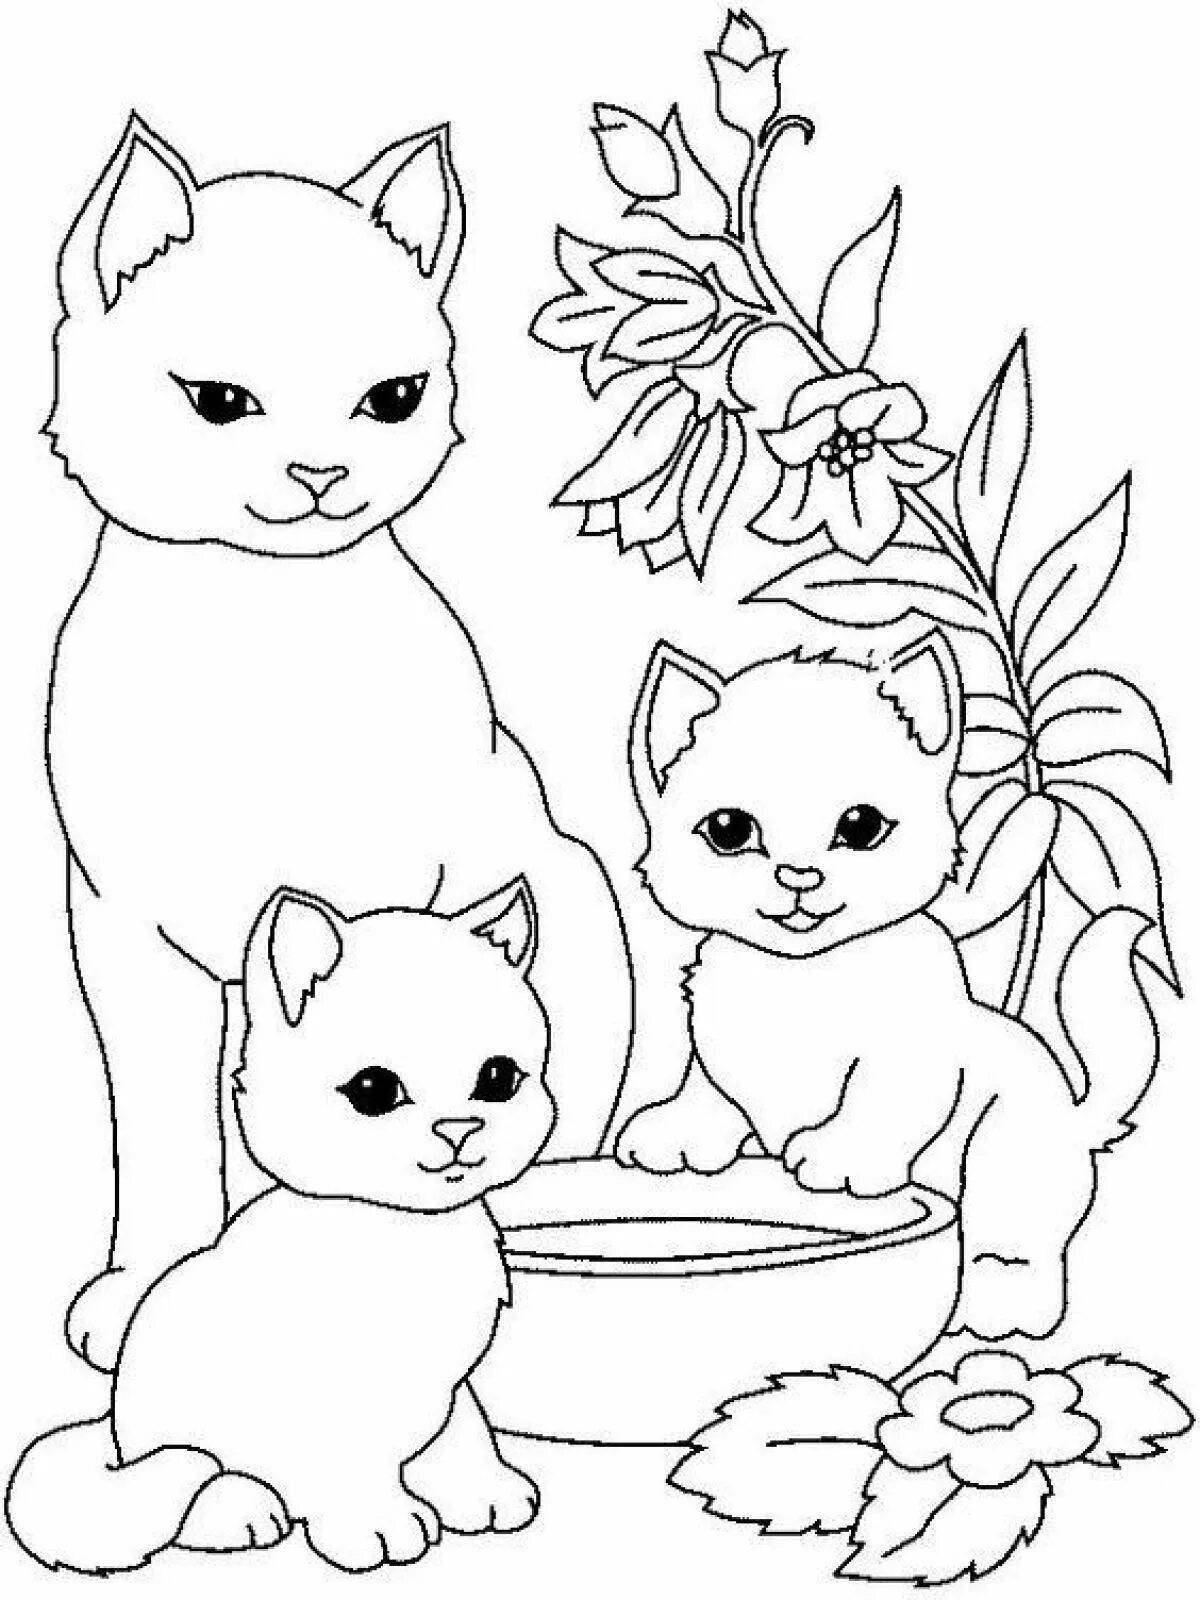 Coloring page energetic cat for kids